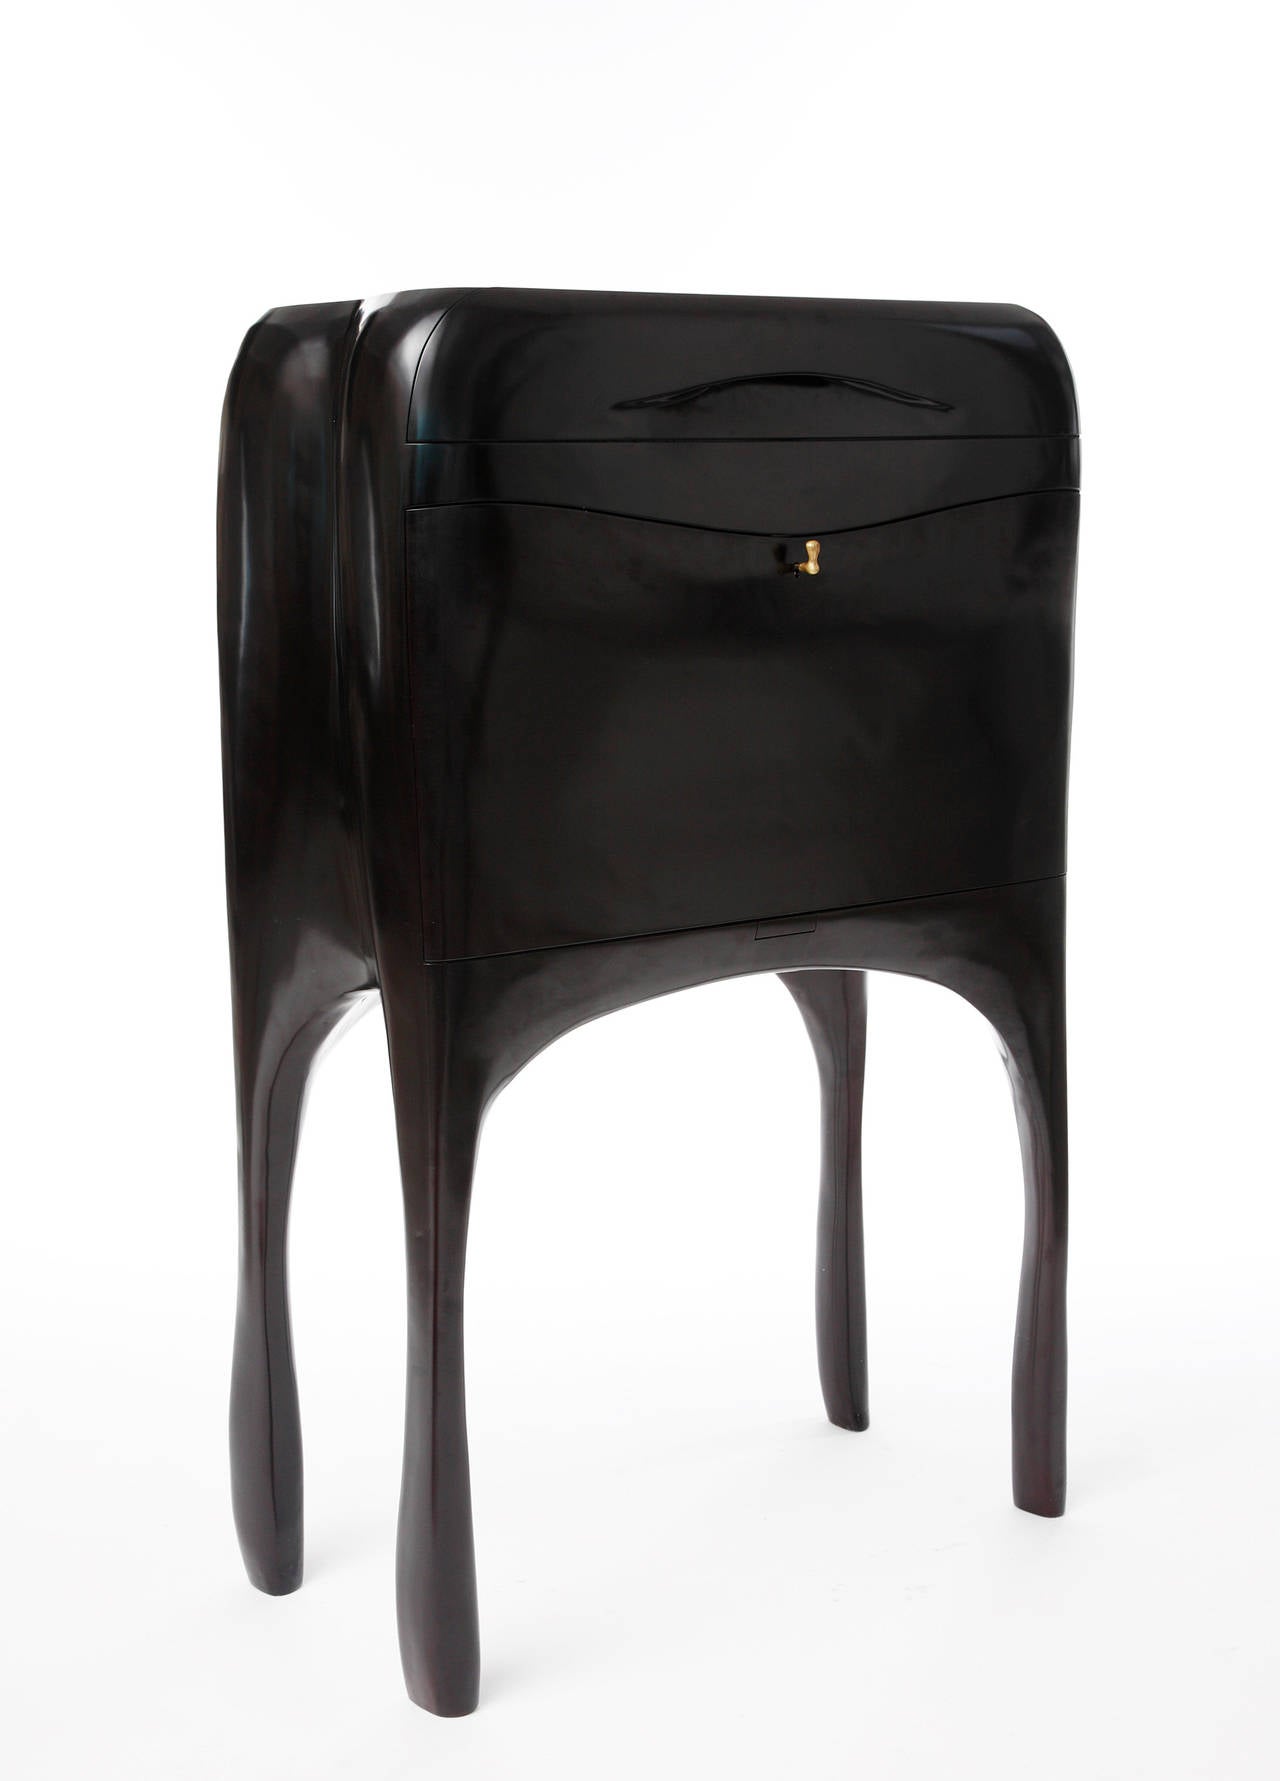 French Drop-Leaf Sculpted Secretaire by Jacques Jarrige, 2006